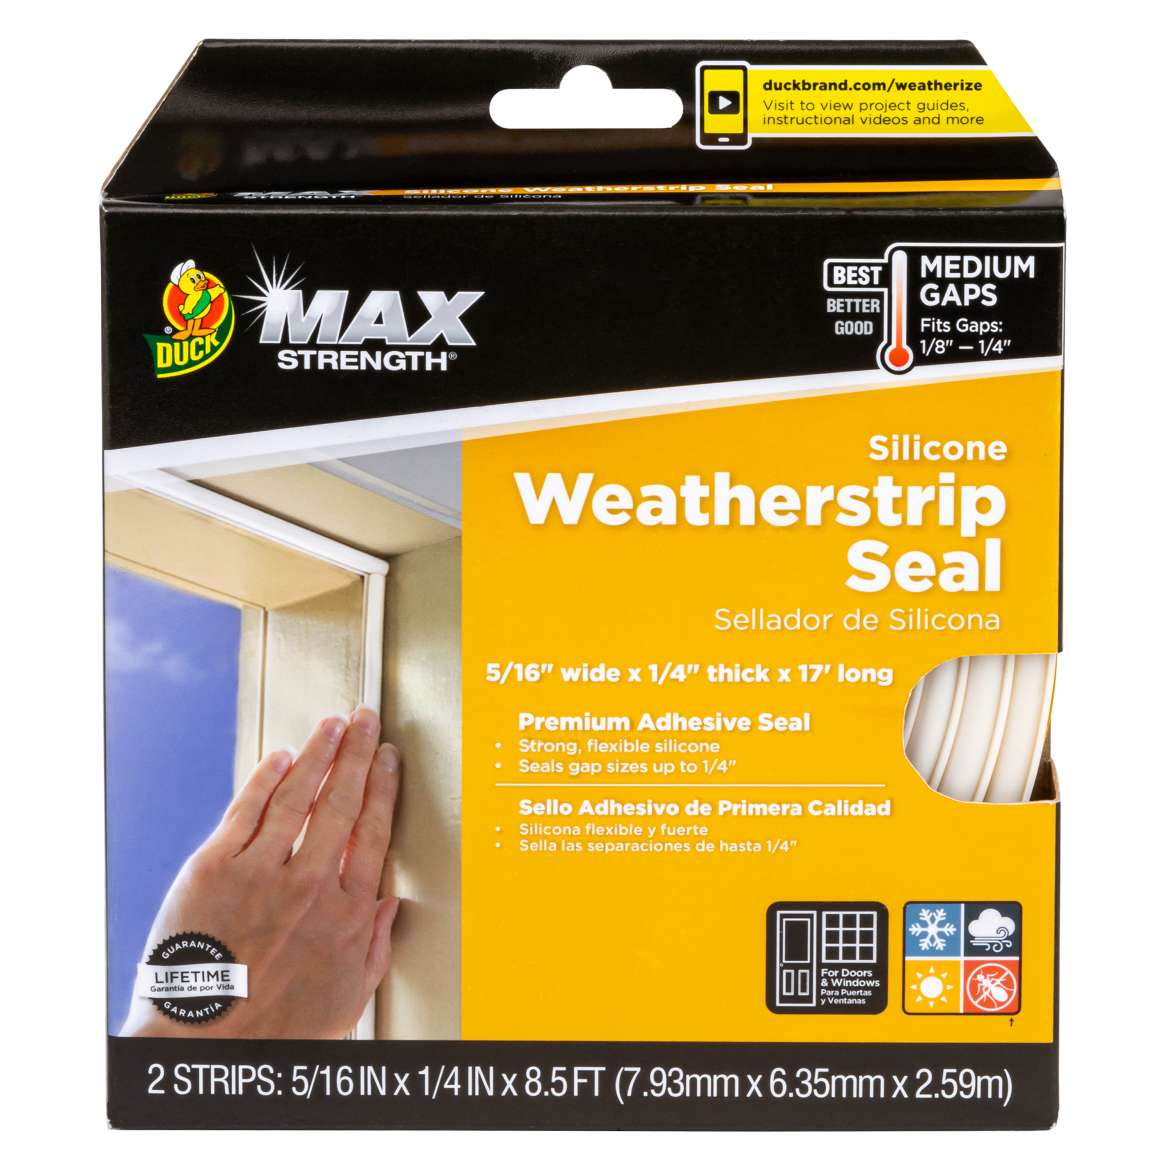 Max Strength Silicone Weatherstrip Seal Image